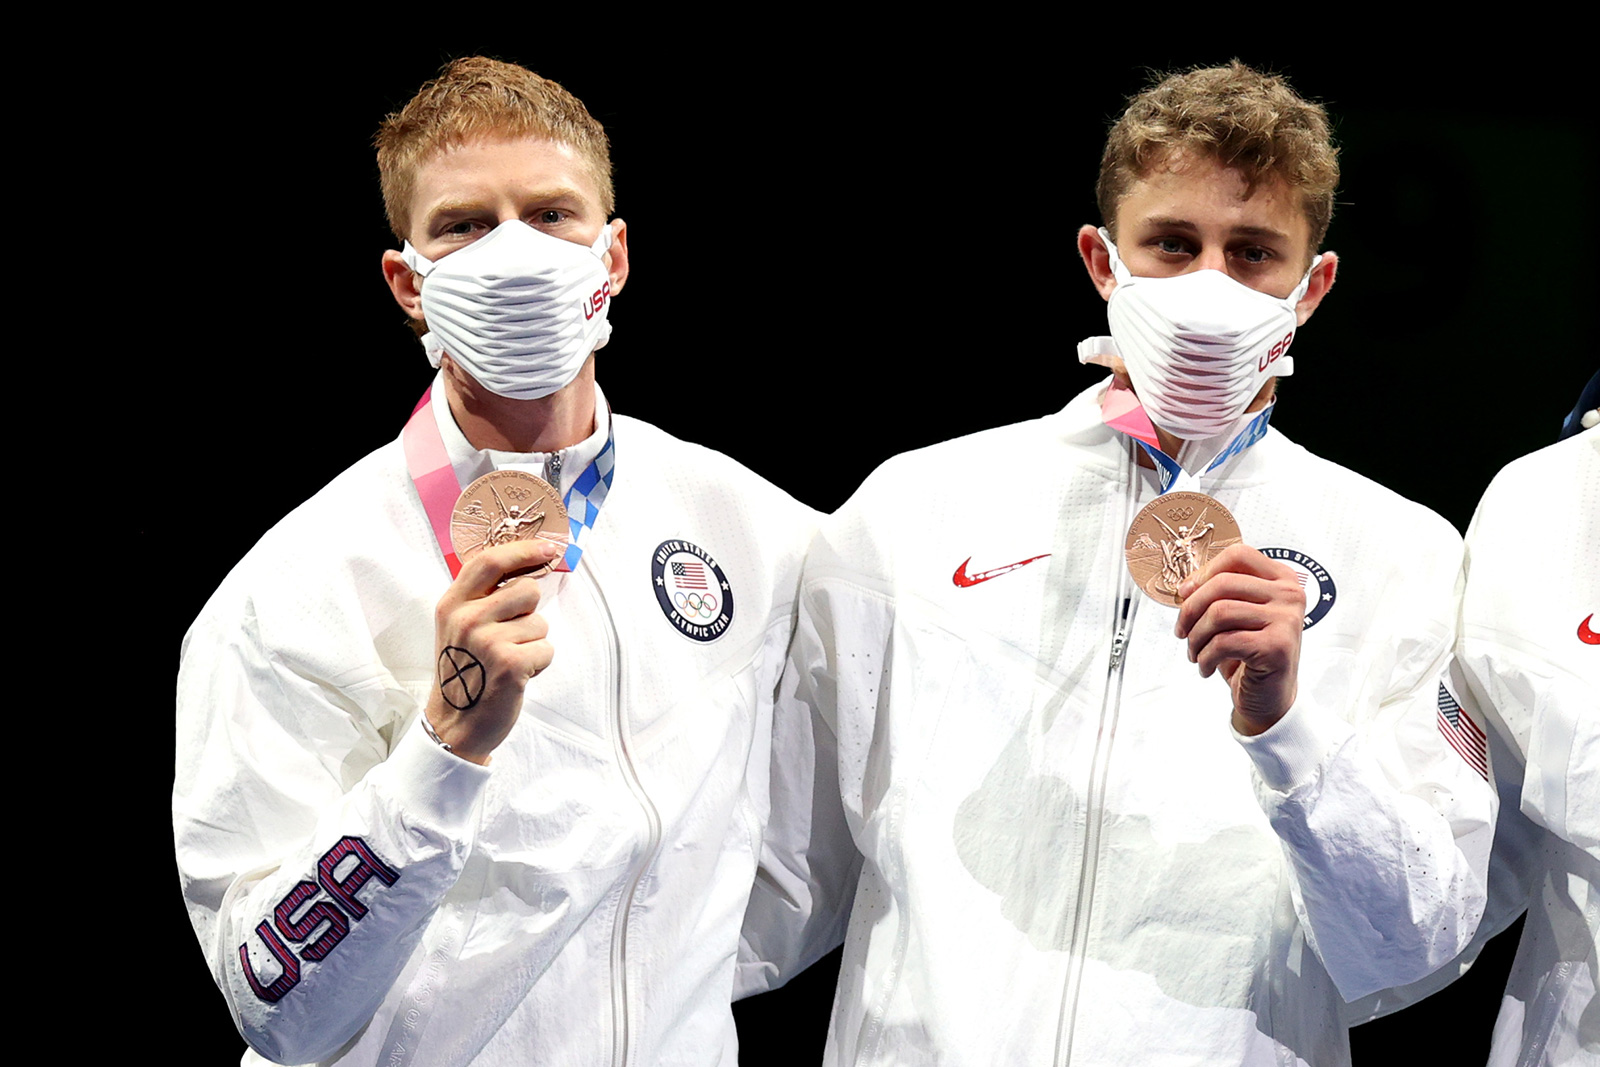 Bronze medalist Race Imboden, left, holds up his medal on the podium during the medal ceremony for the men's team foil event on August 1. 